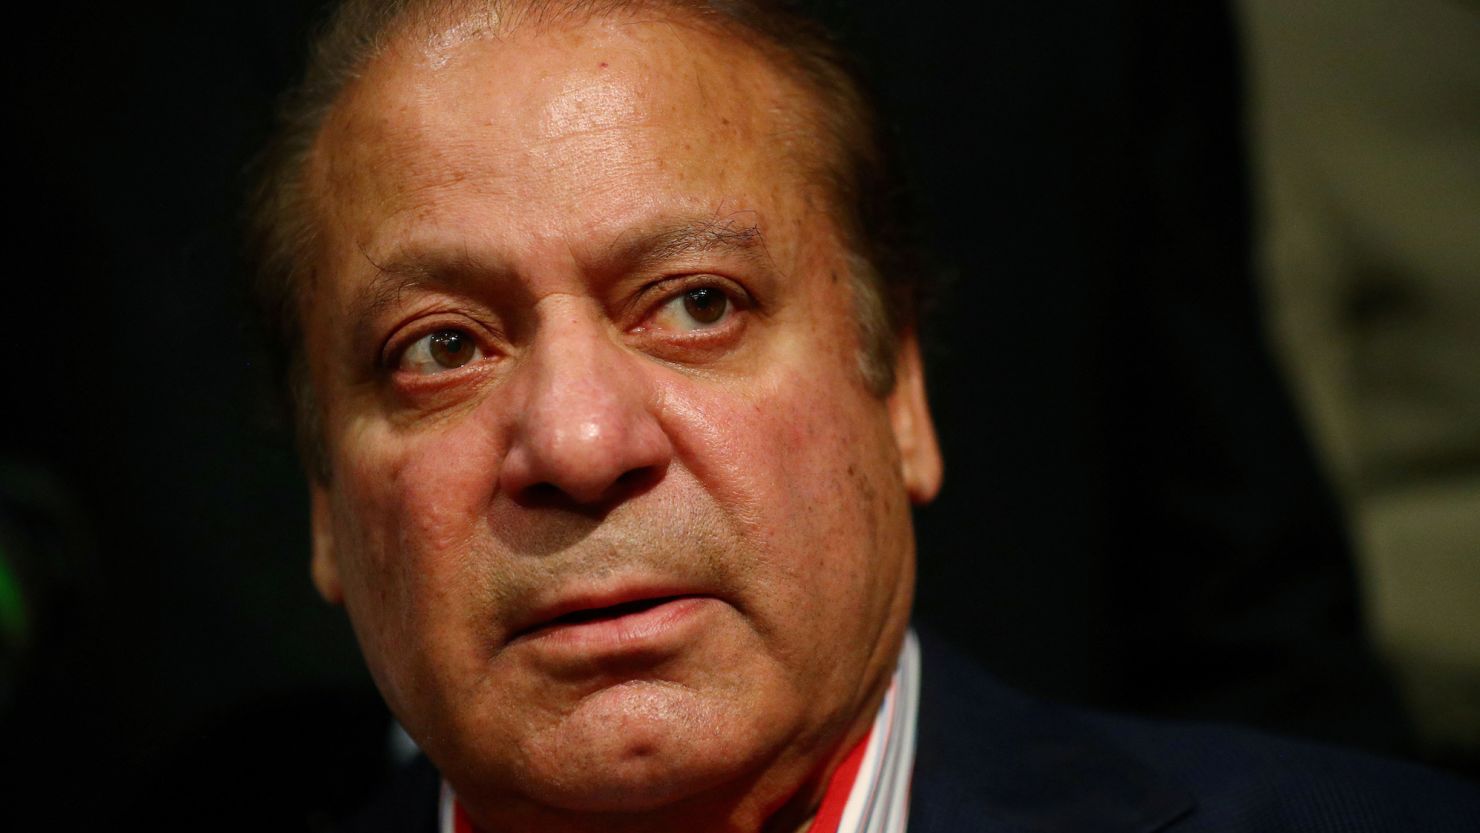 Nawaz Sharif, pictured in 2018, has served as Pakistan's prime minister three times and was once ousted in a military coup.